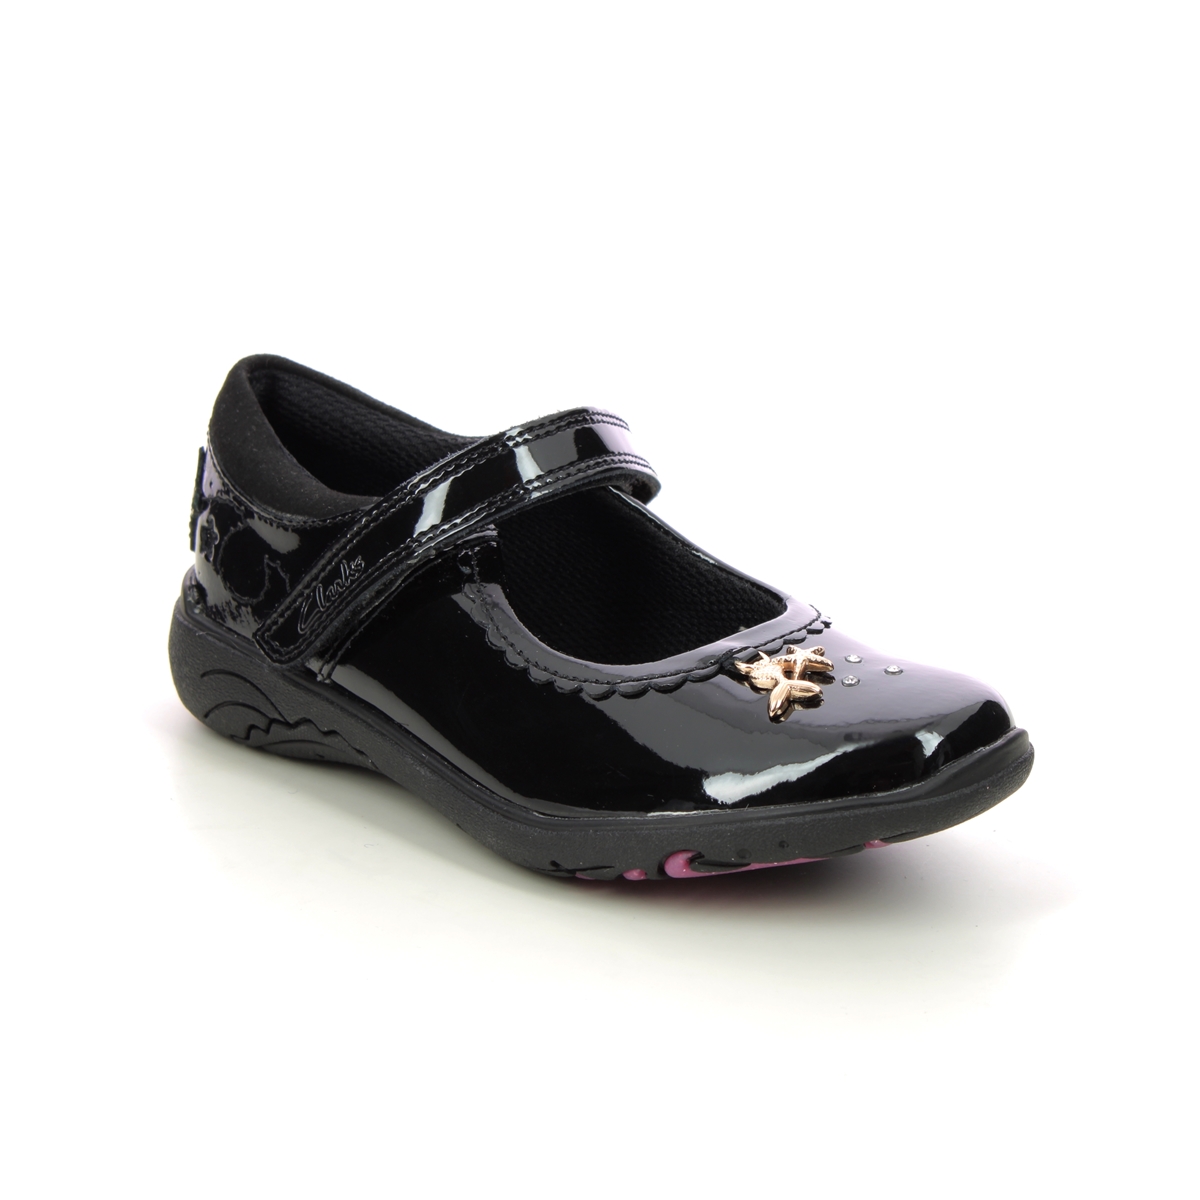 Clarks Relda Sea K Mary Jane Black Patent Kids Girls School Shoes 722418H In Size 1 In Plain Black Patent H Width Fitting Extra Wide For School For ki